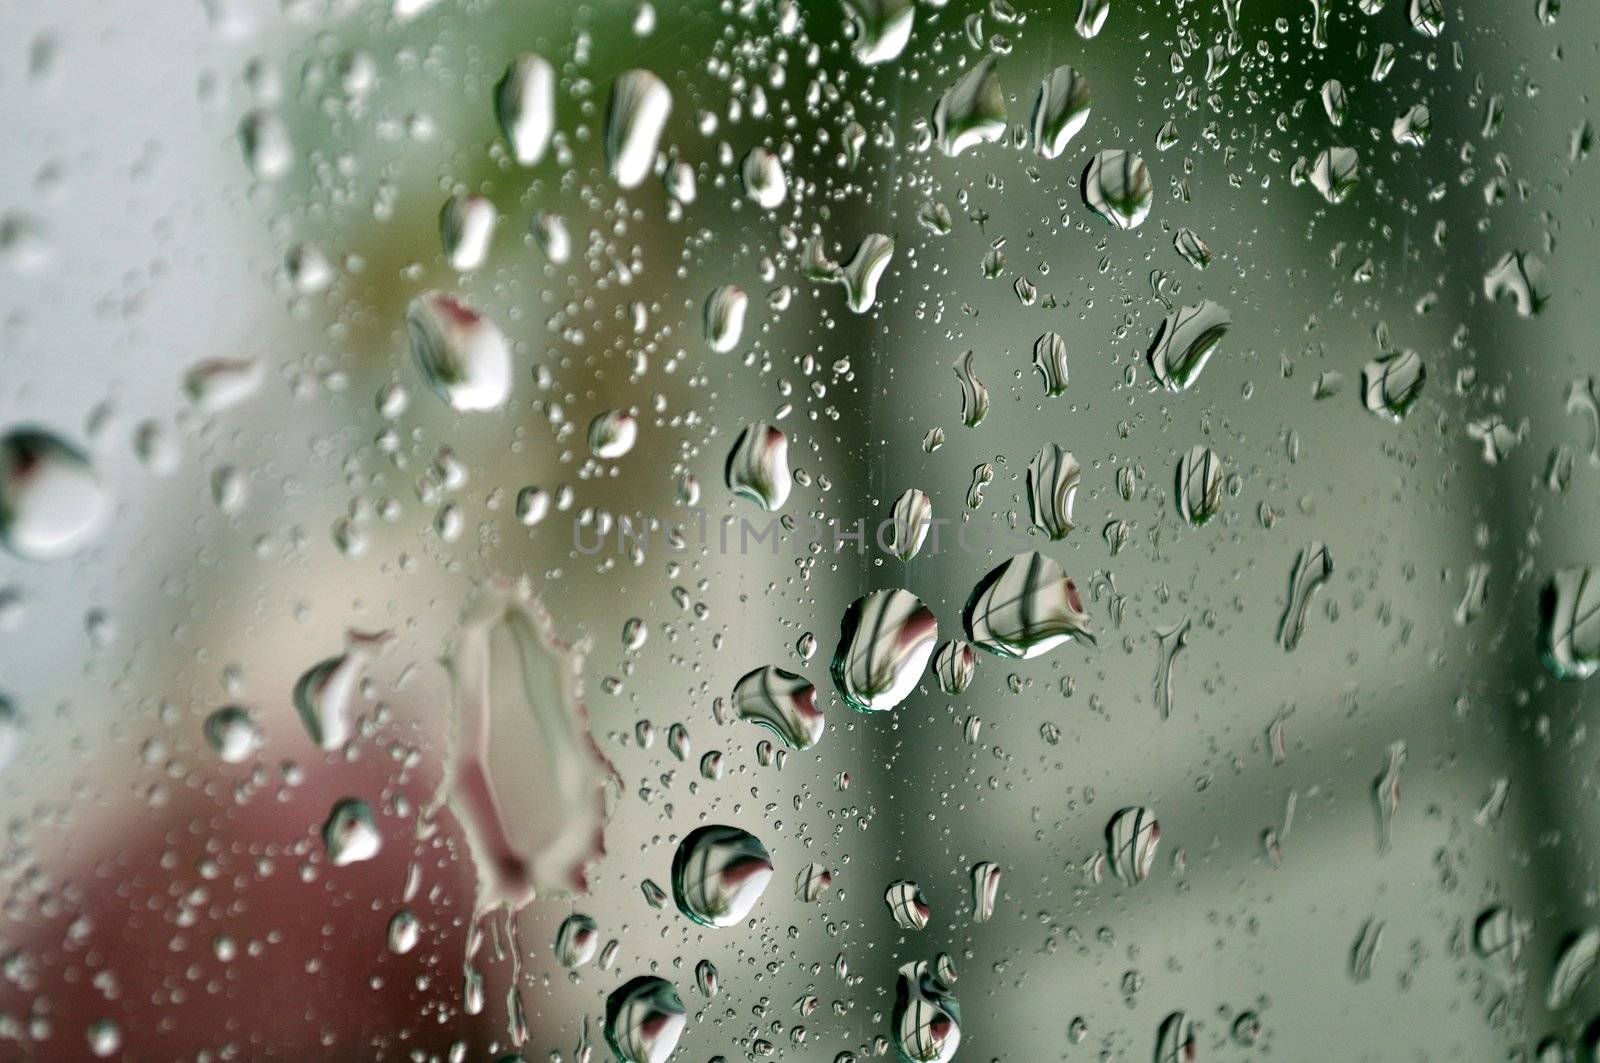 Raindrops cling to a car window after a brief shower.